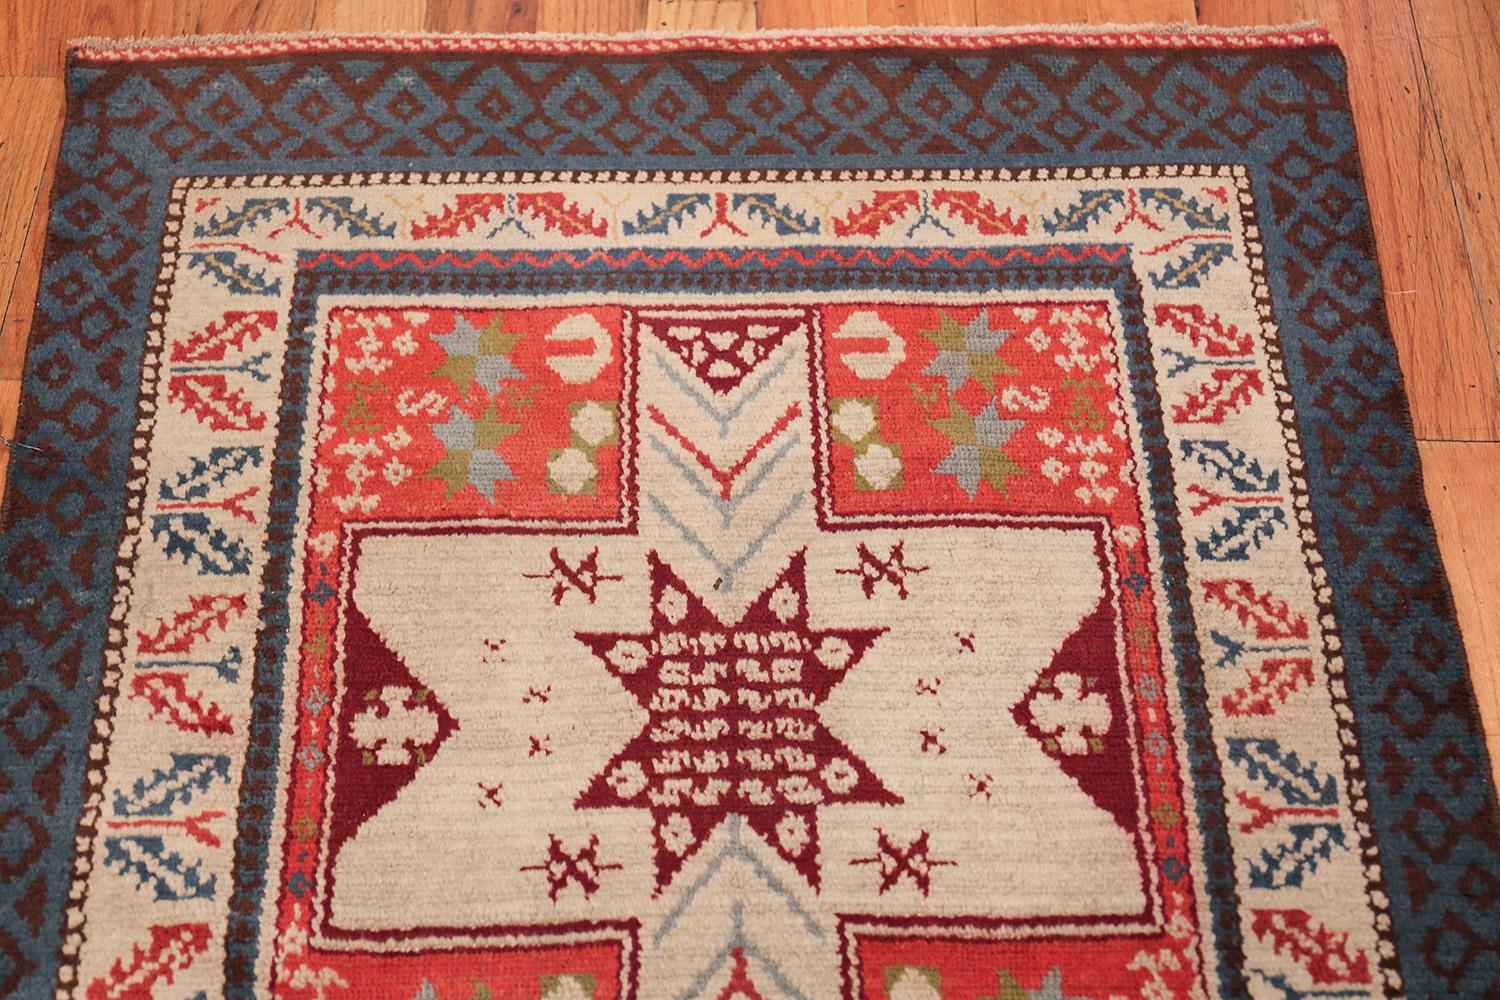 Hand-Knotted Small Size Antique Spanish Rug. Size: 3 ft x 5 ft 10 in (0.91 m x 1.78 m)